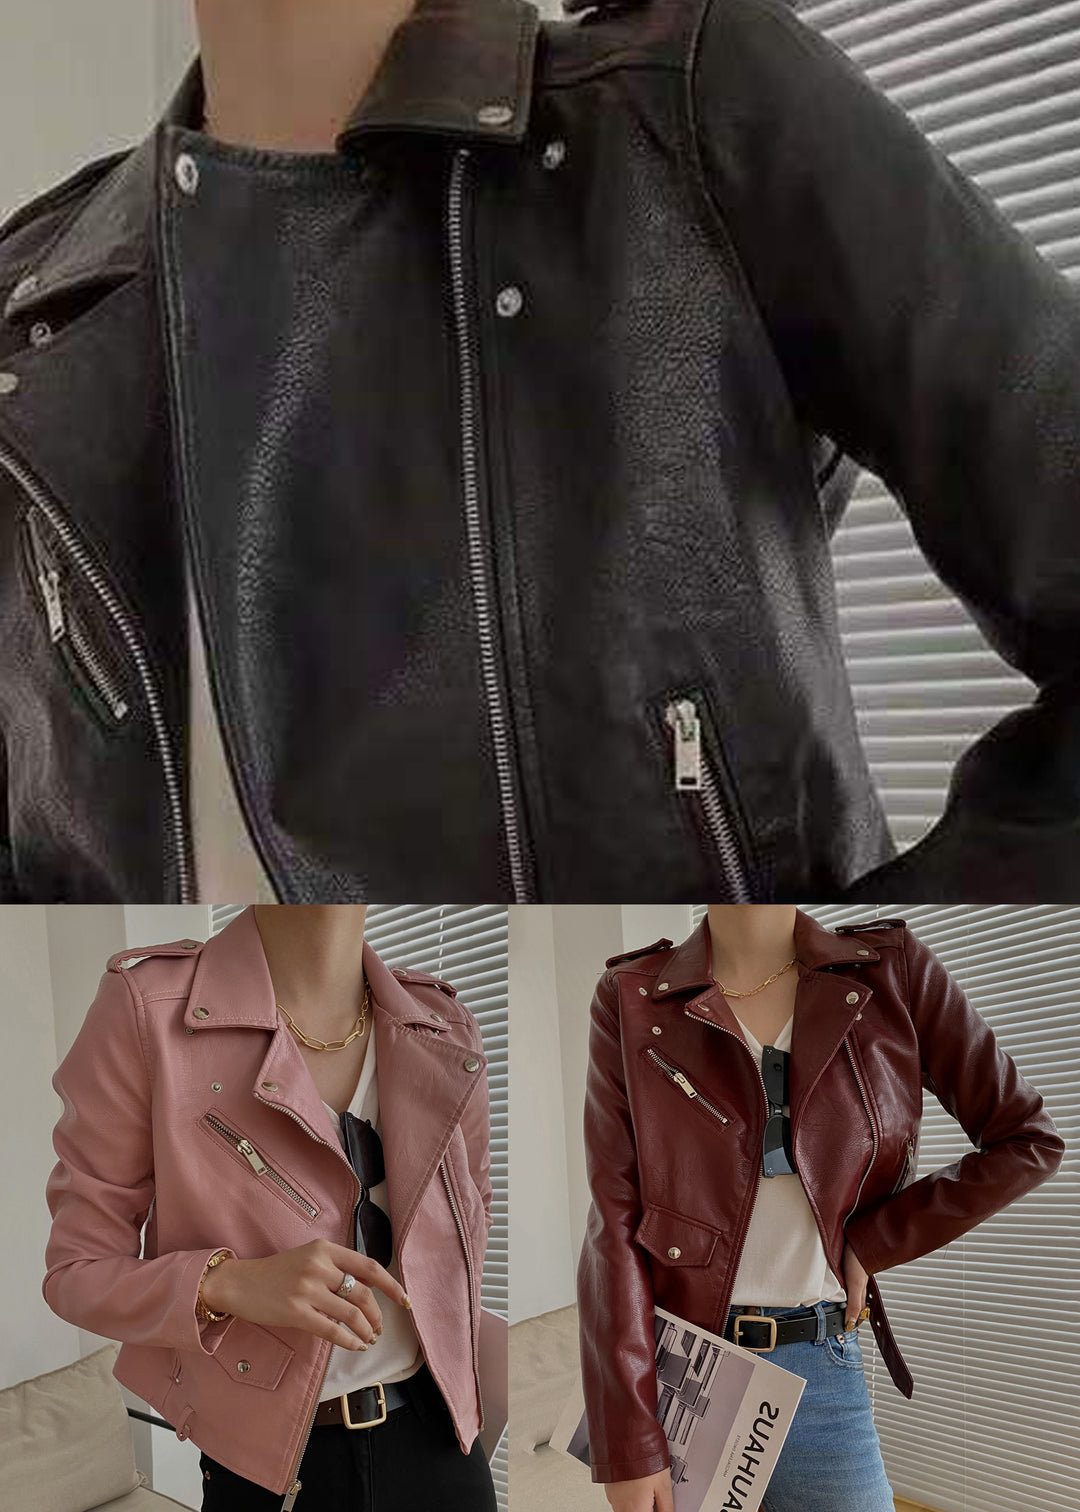 Modern Mulberry Peter Pan Collar Patchwork Faux Leather Jackets Fall